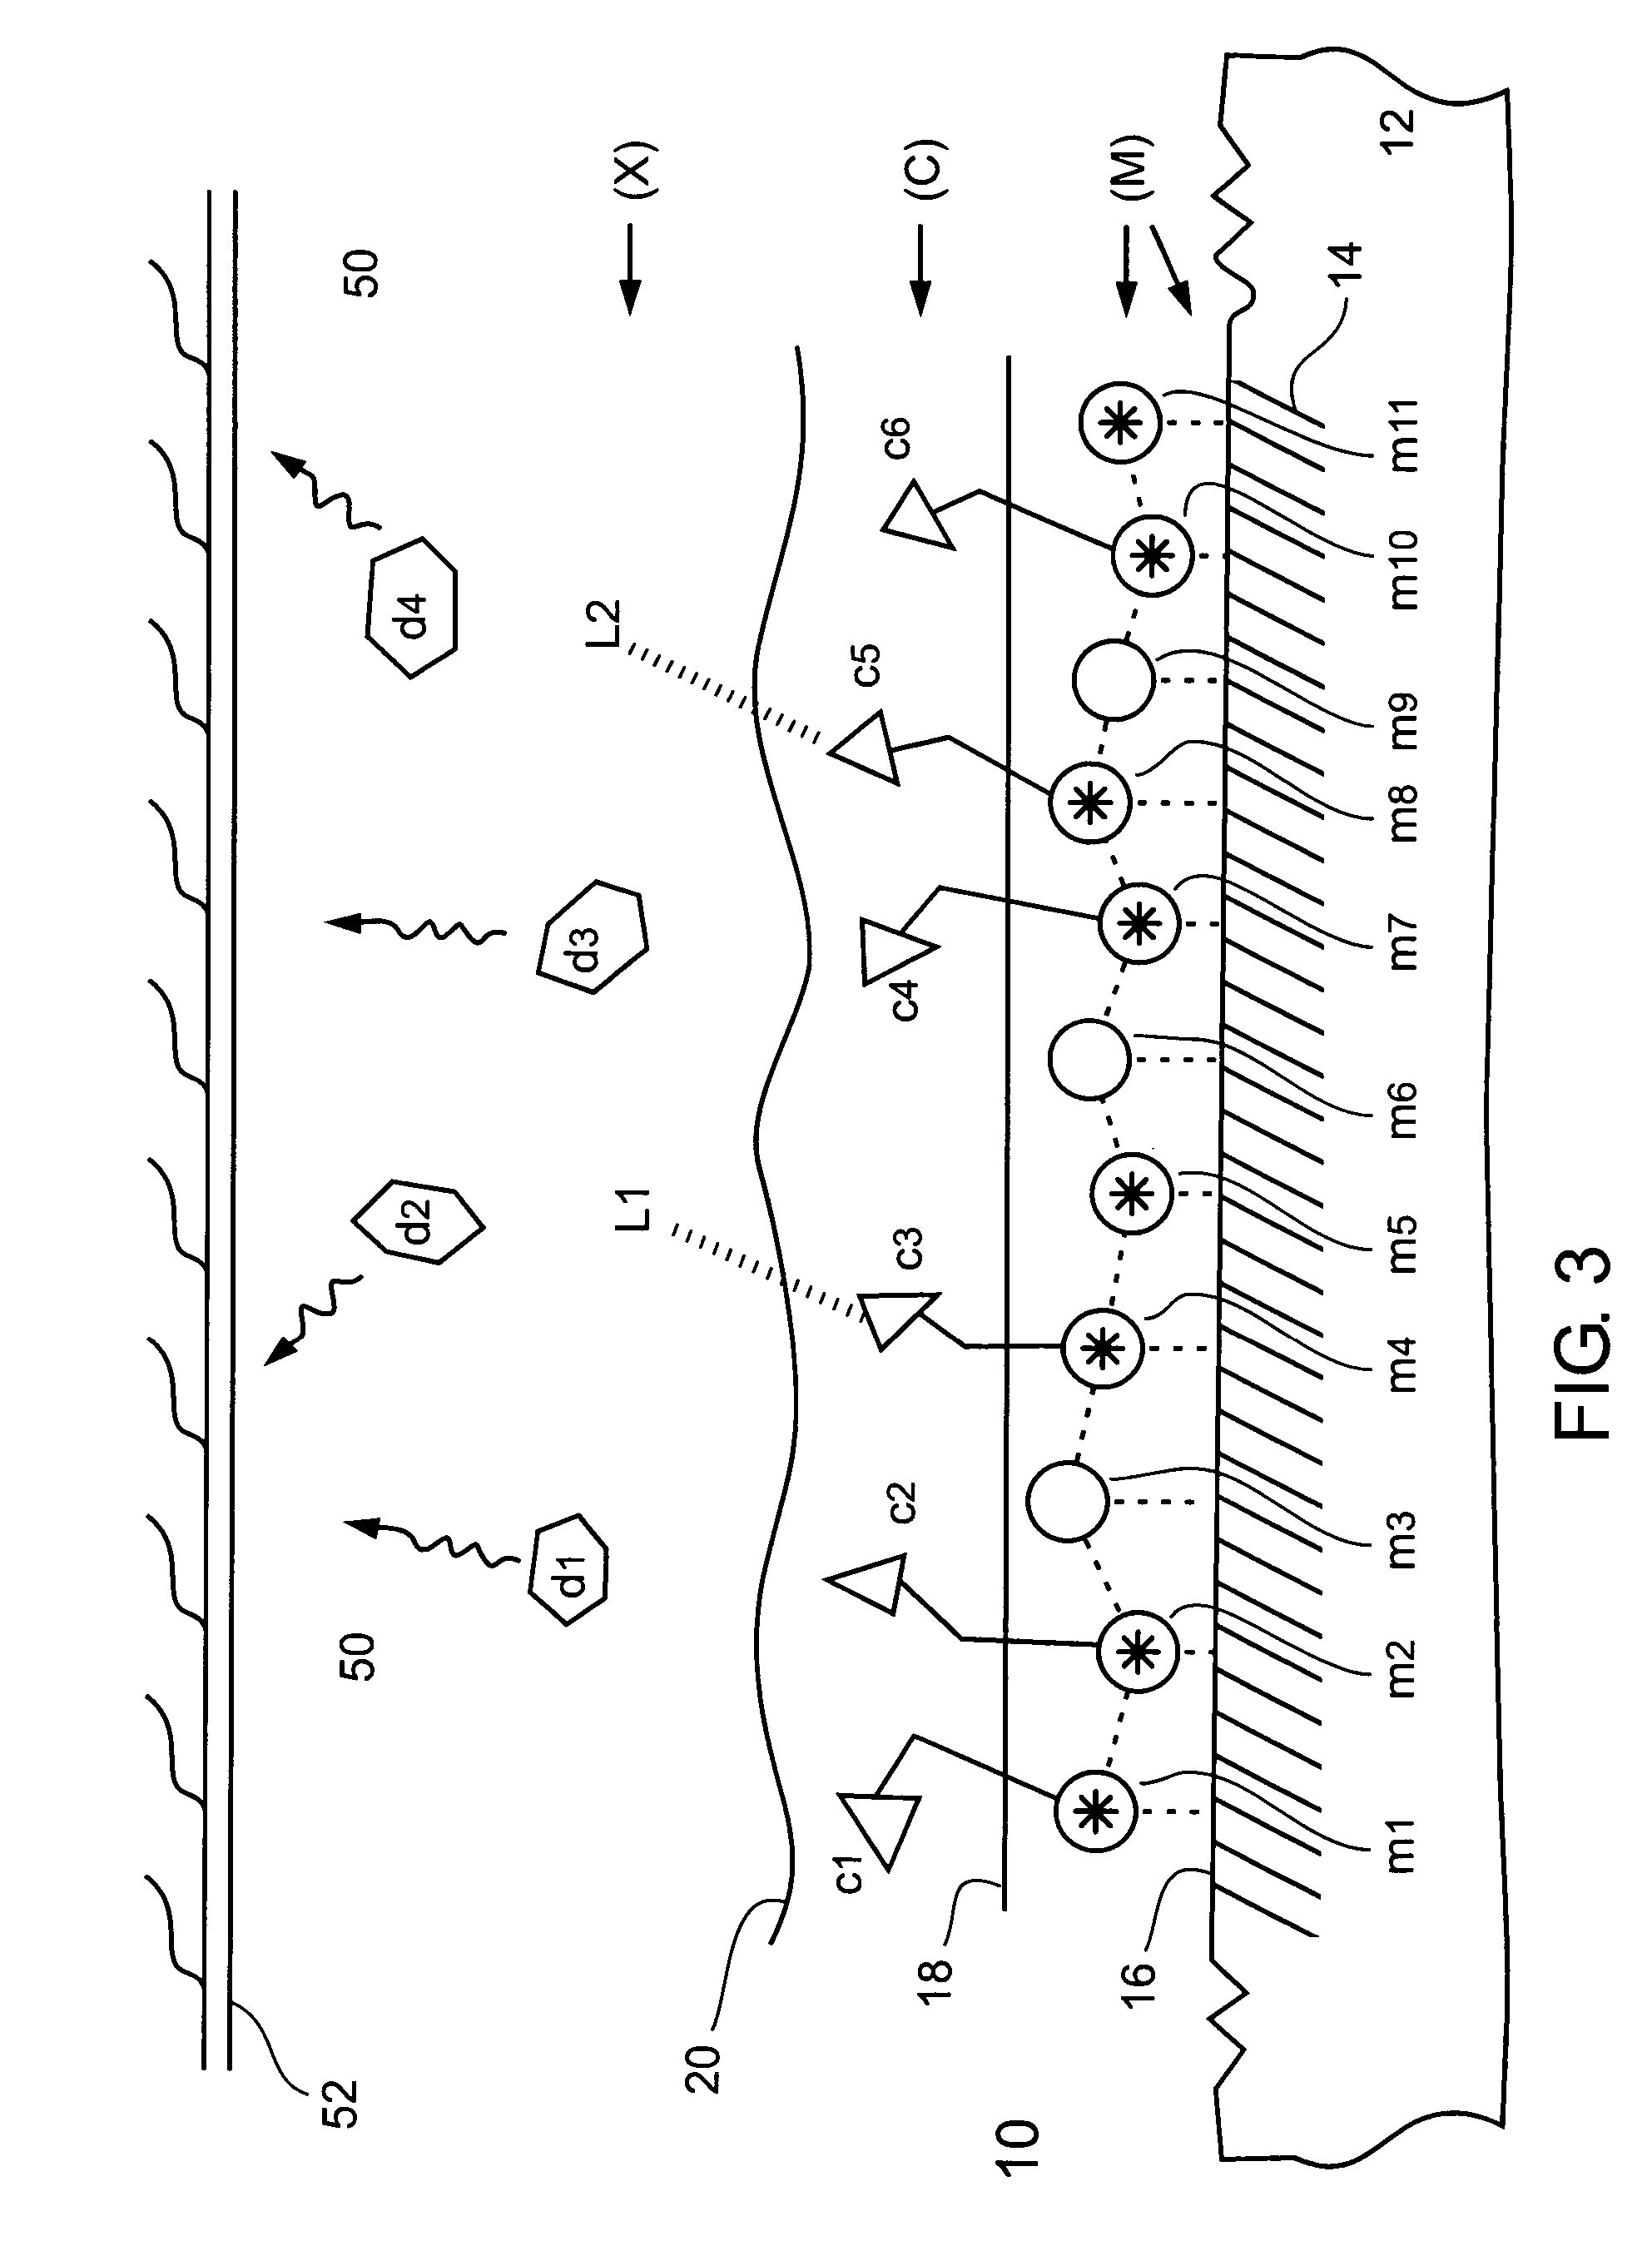 Chelating and binding chemicals to a medical implant, medical device formed, and therapeutic applications